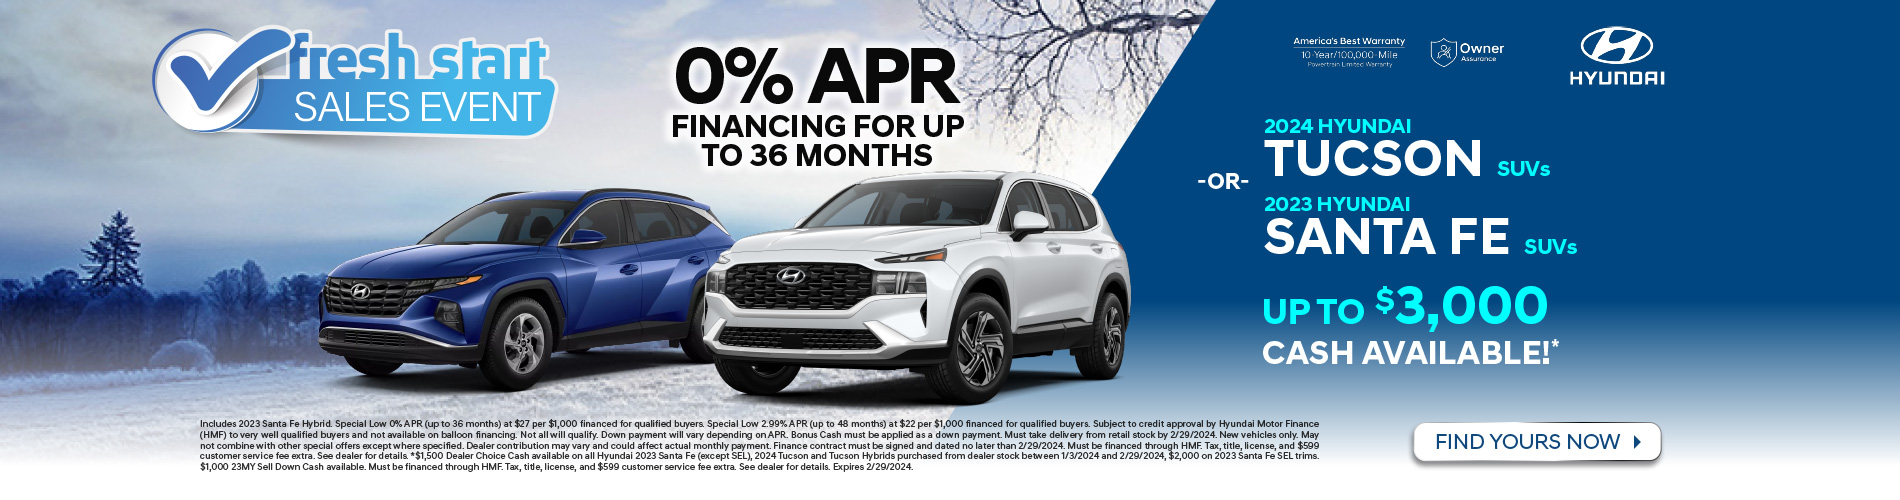 0% APR Financing for up to 36 Months